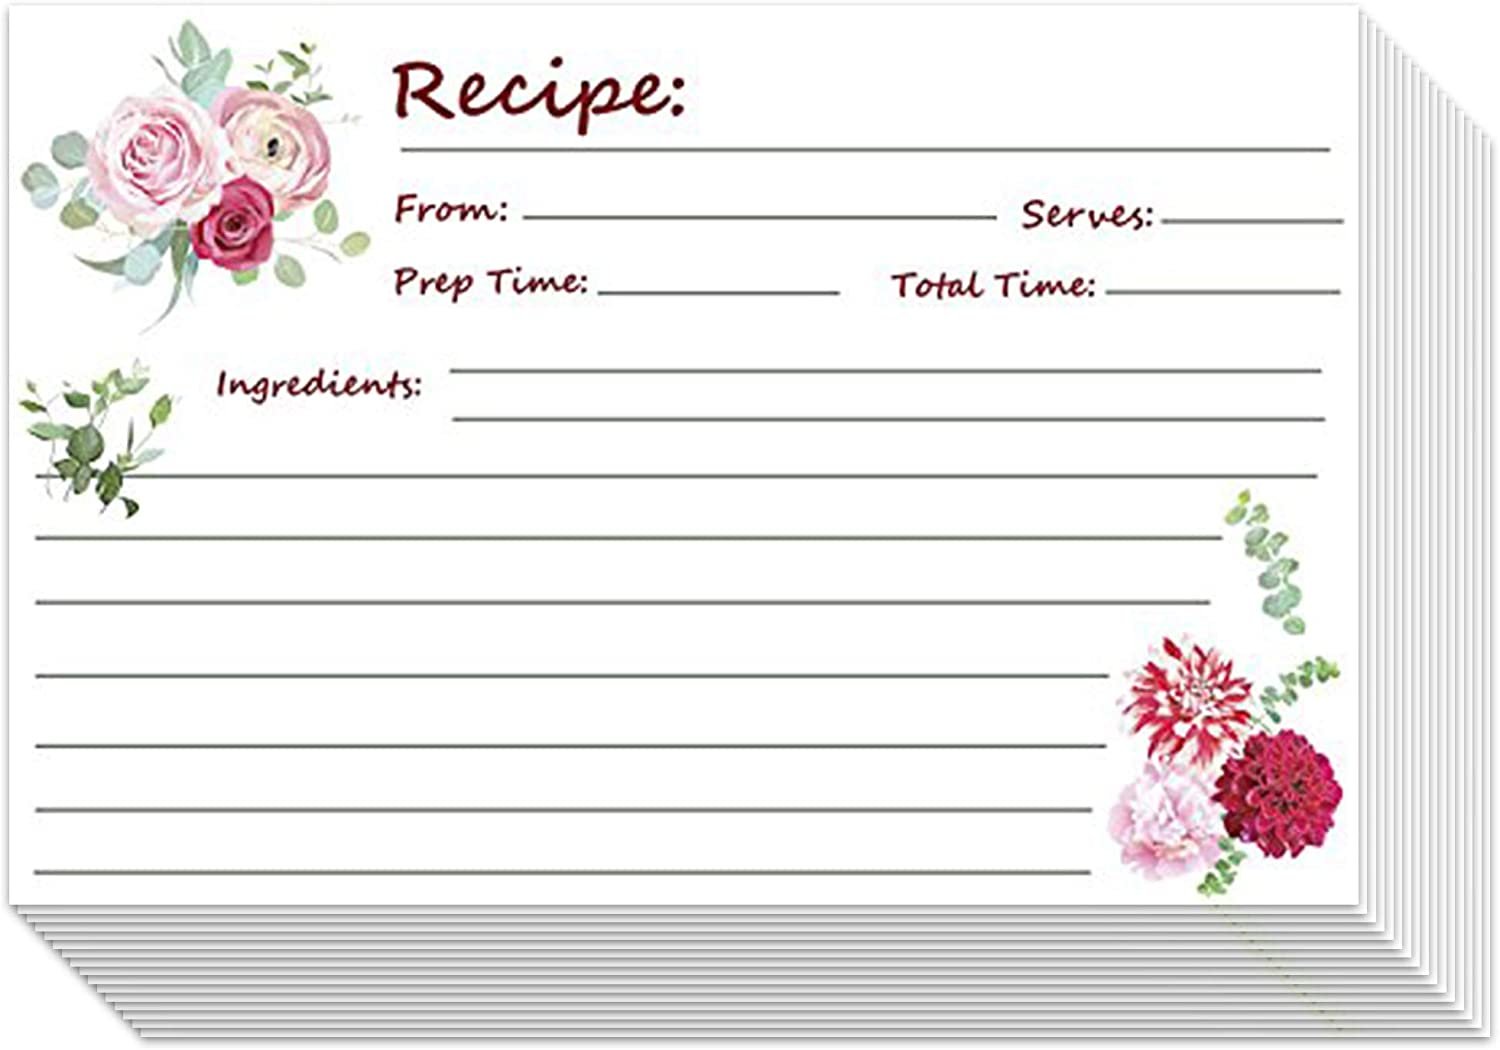 Recipe Cards, Elegant Floral - Great For Wedding, Bridal Shower, and Special Occasion, Or for Your own Kitchen - 4” X 6” Inches, 80 lb. Cover Stock | 50 Sheets Per Pack - image 2 of 10